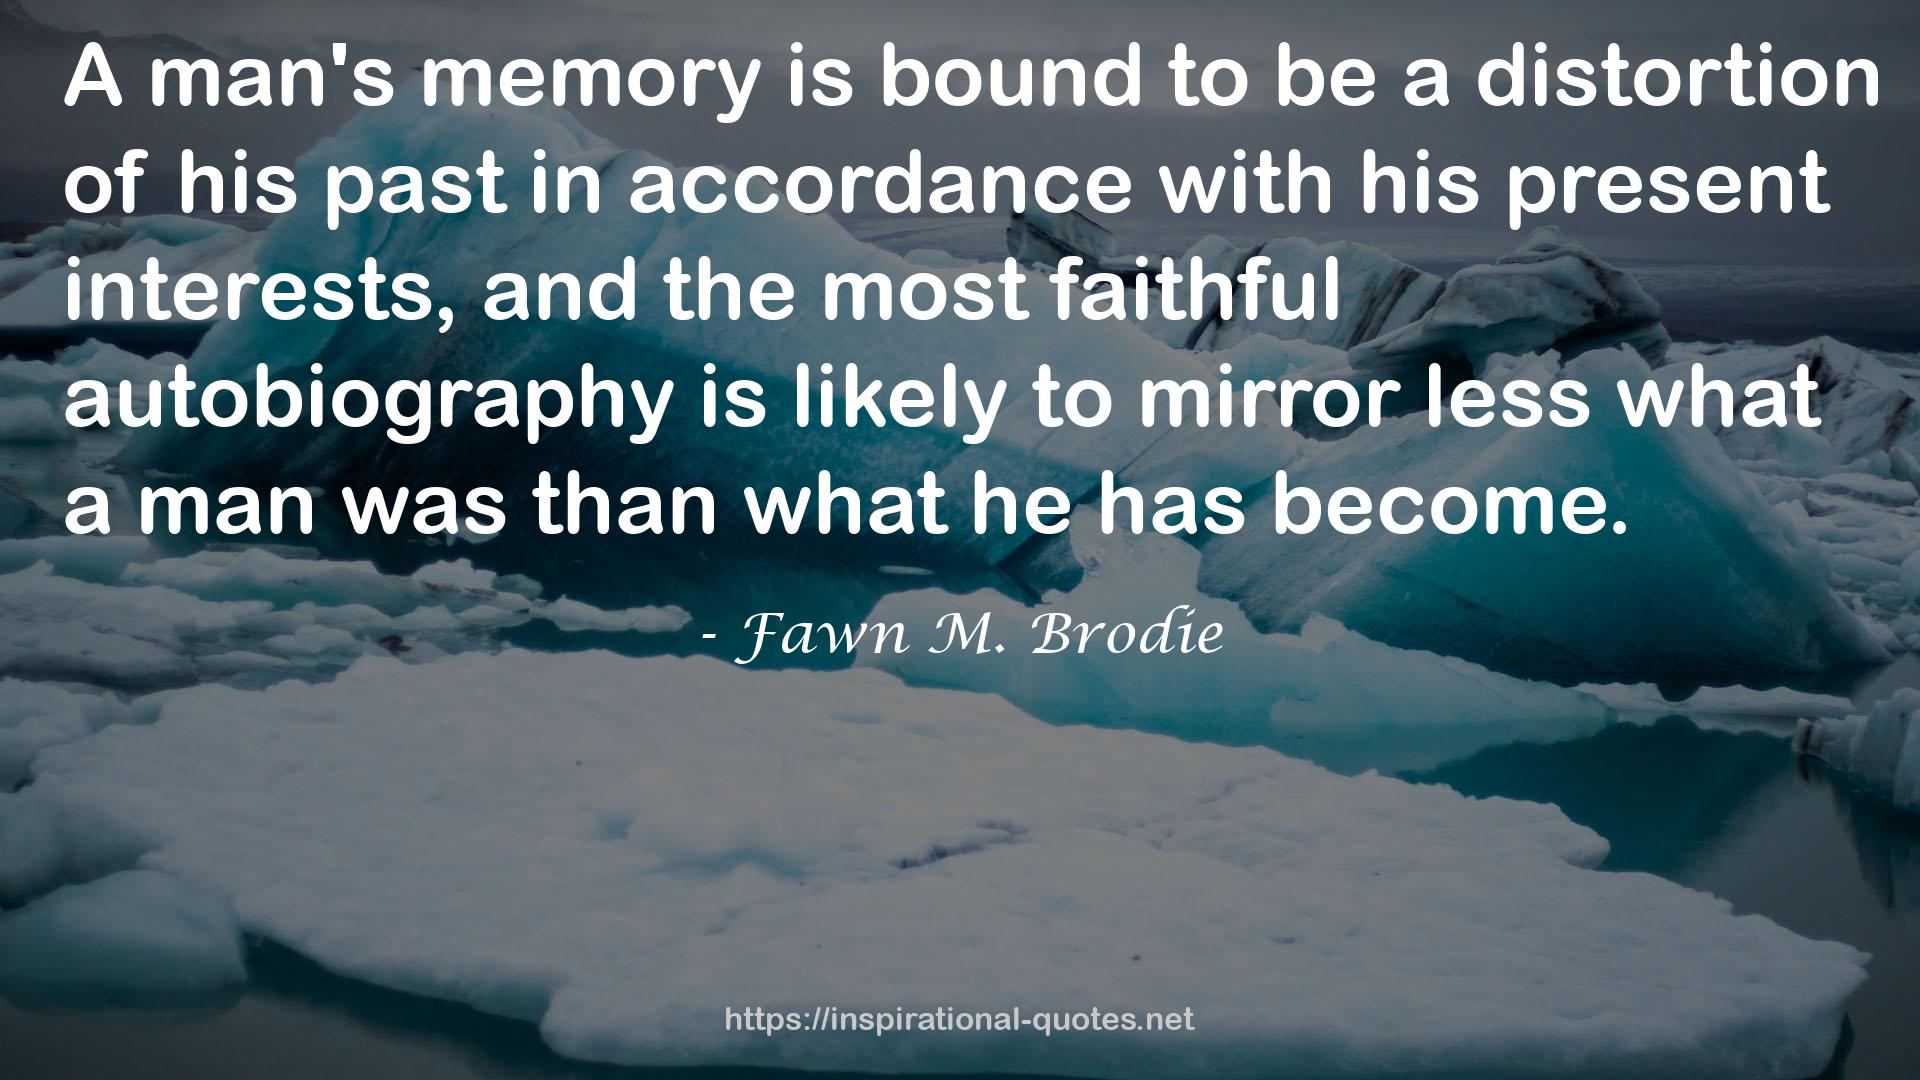 Fawn M. Brodie QUOTES